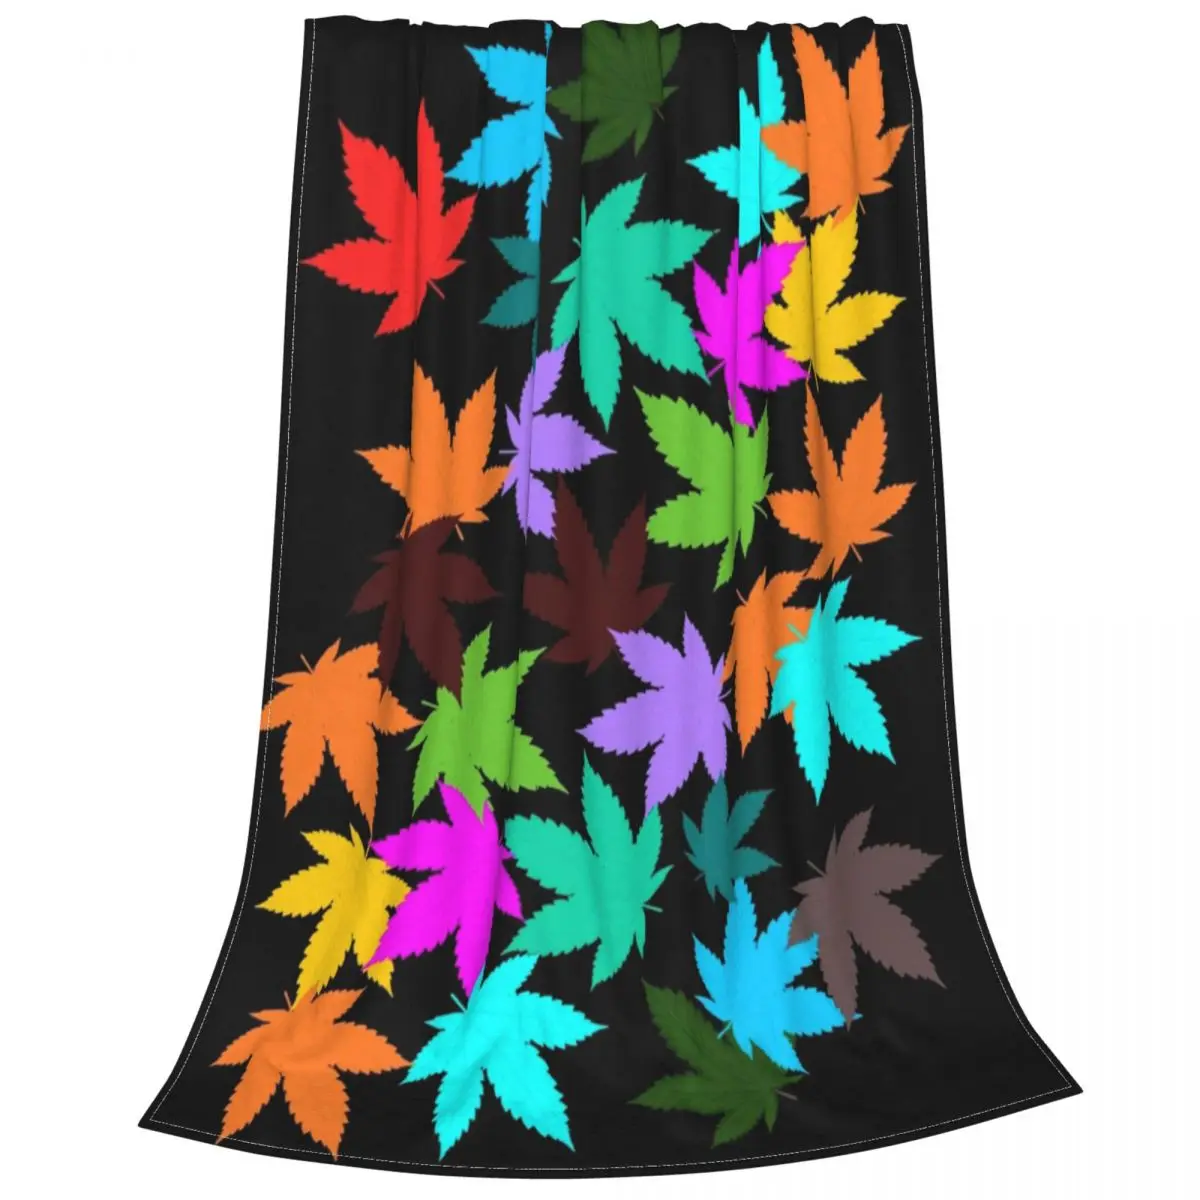 

Weed Leaf Colourfull Blankets Fleece Decoration Herb Portable Soft Throw Blanket for Home Bedroom Quilt